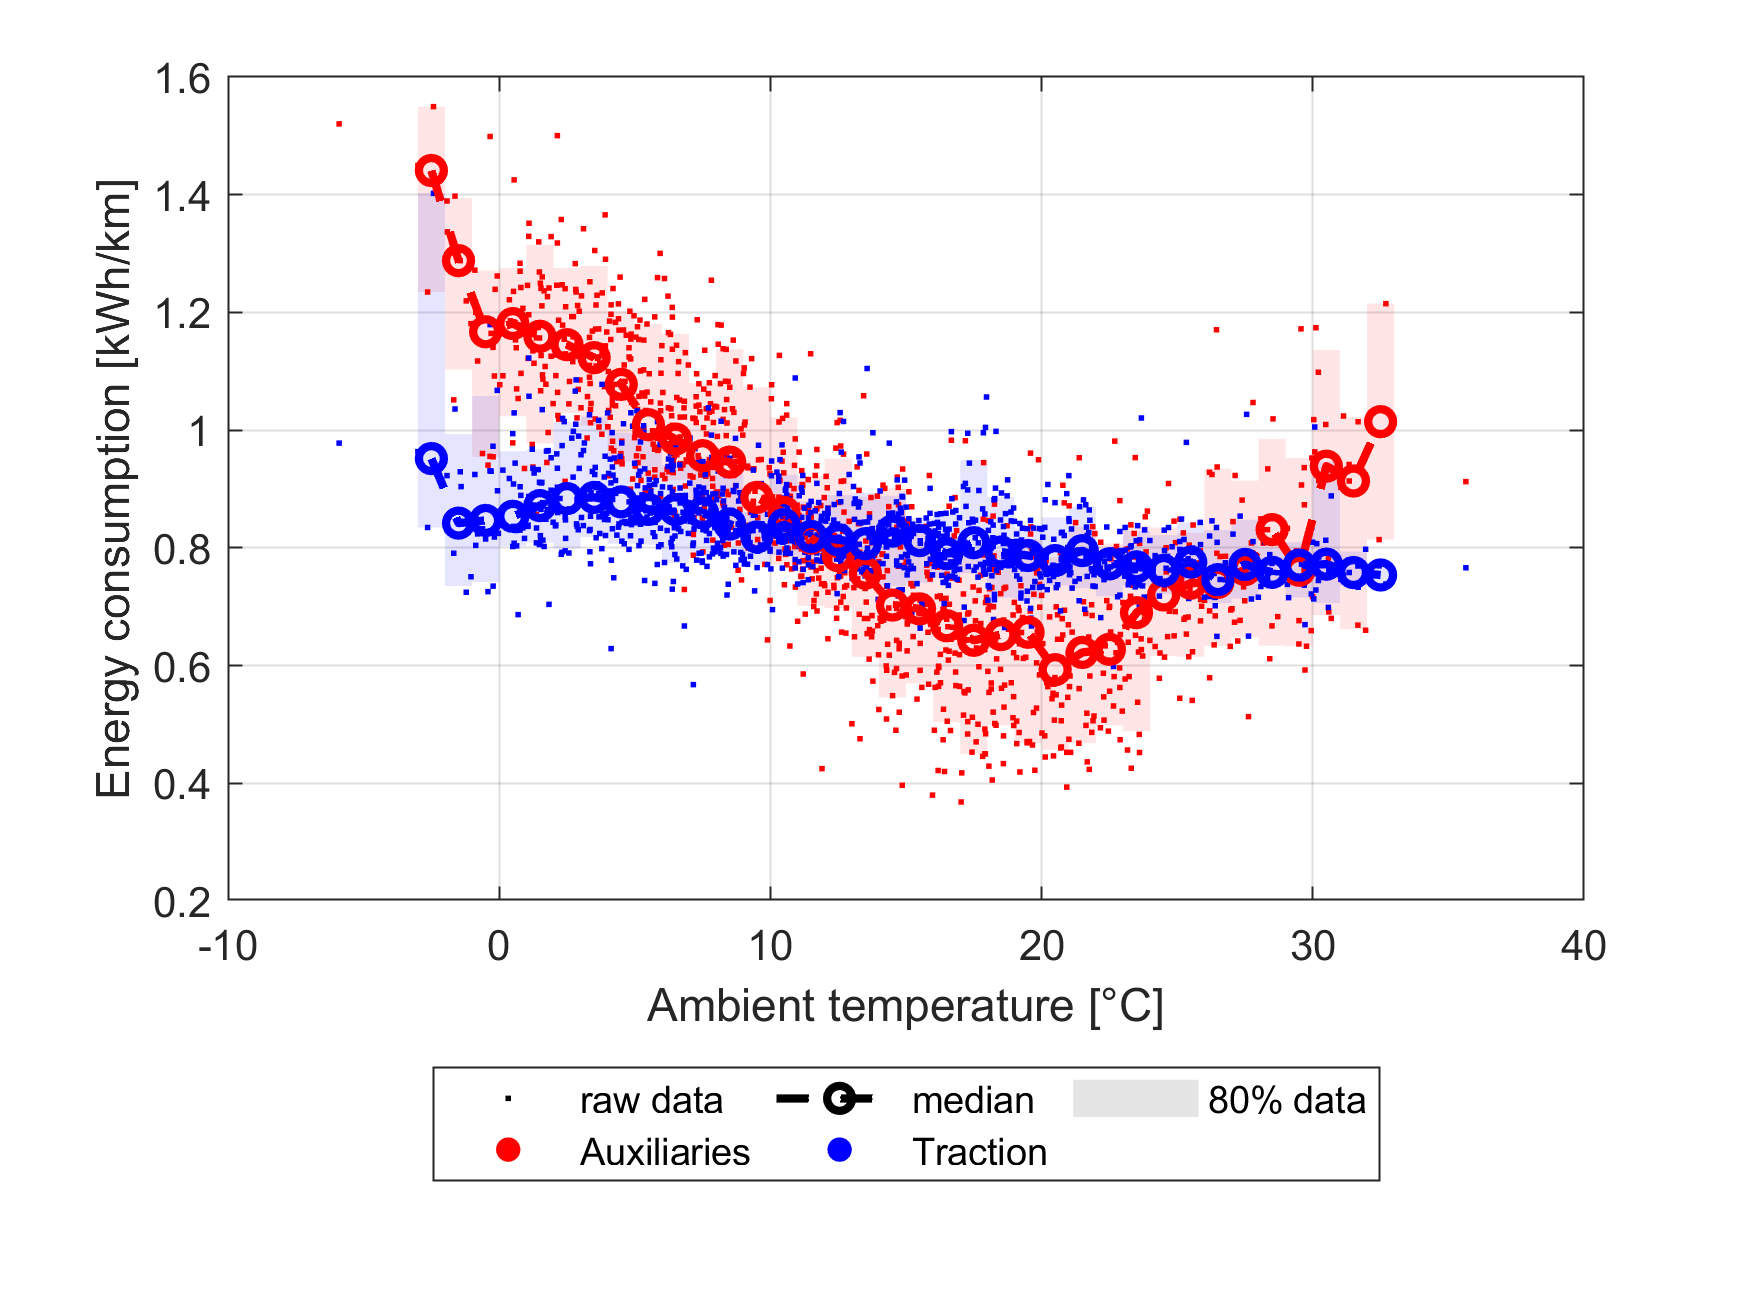 Figure 1: Recorded energy consumption per driven distance averaged over one hour of operation for a trolley bus operated in Zurich. Depending on the ambient temperature, auxiliary consumers require more energy than the traction system.